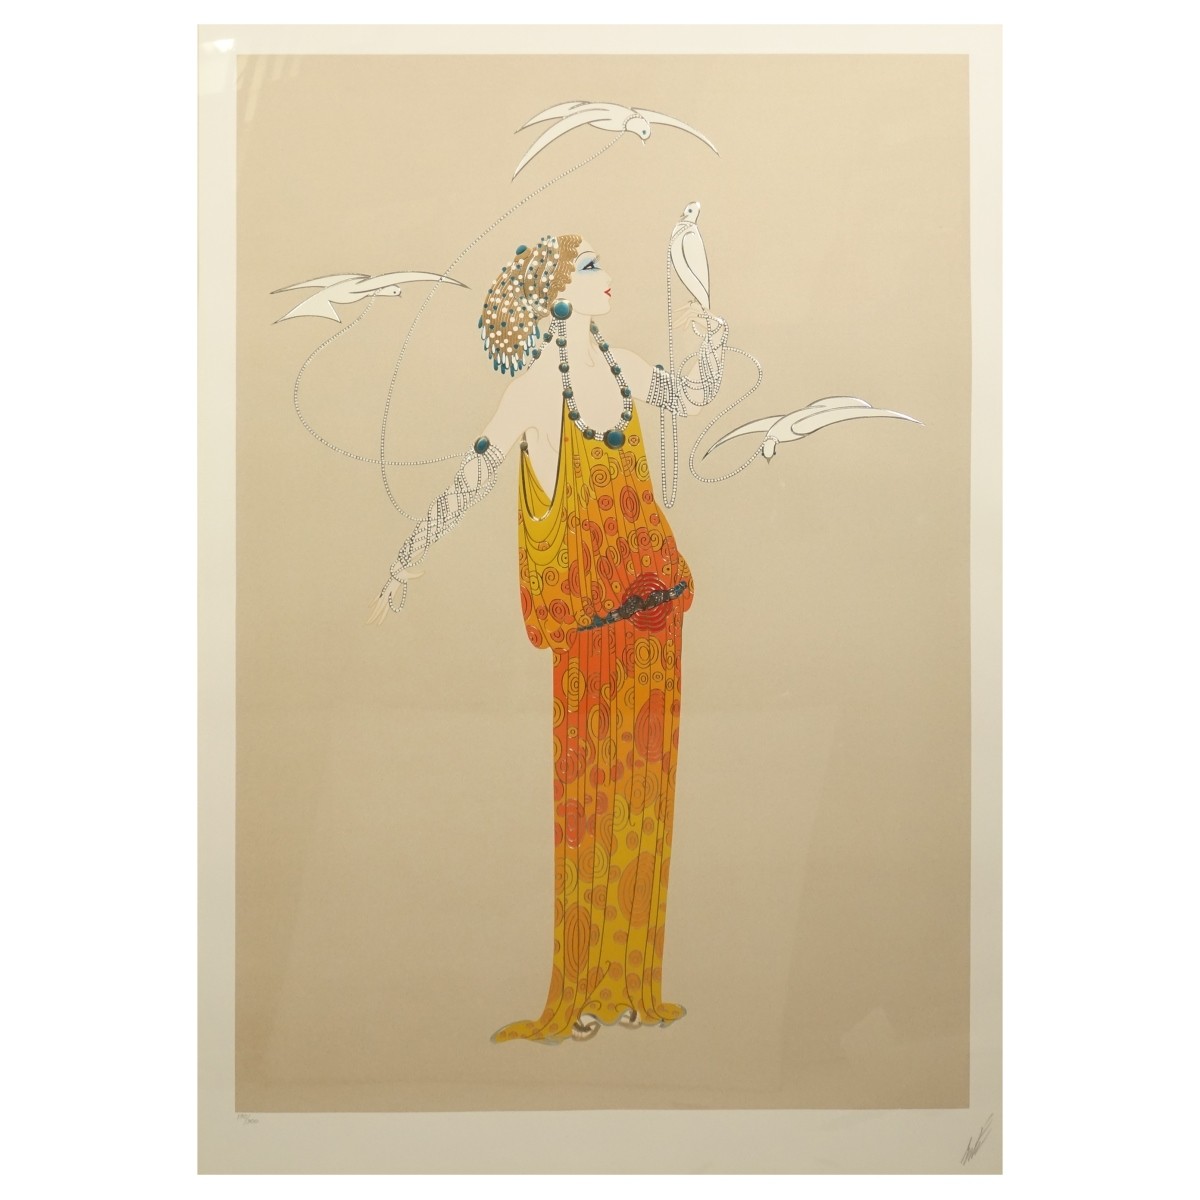 Erte (1892 - 1989) Serigraph with Embossing